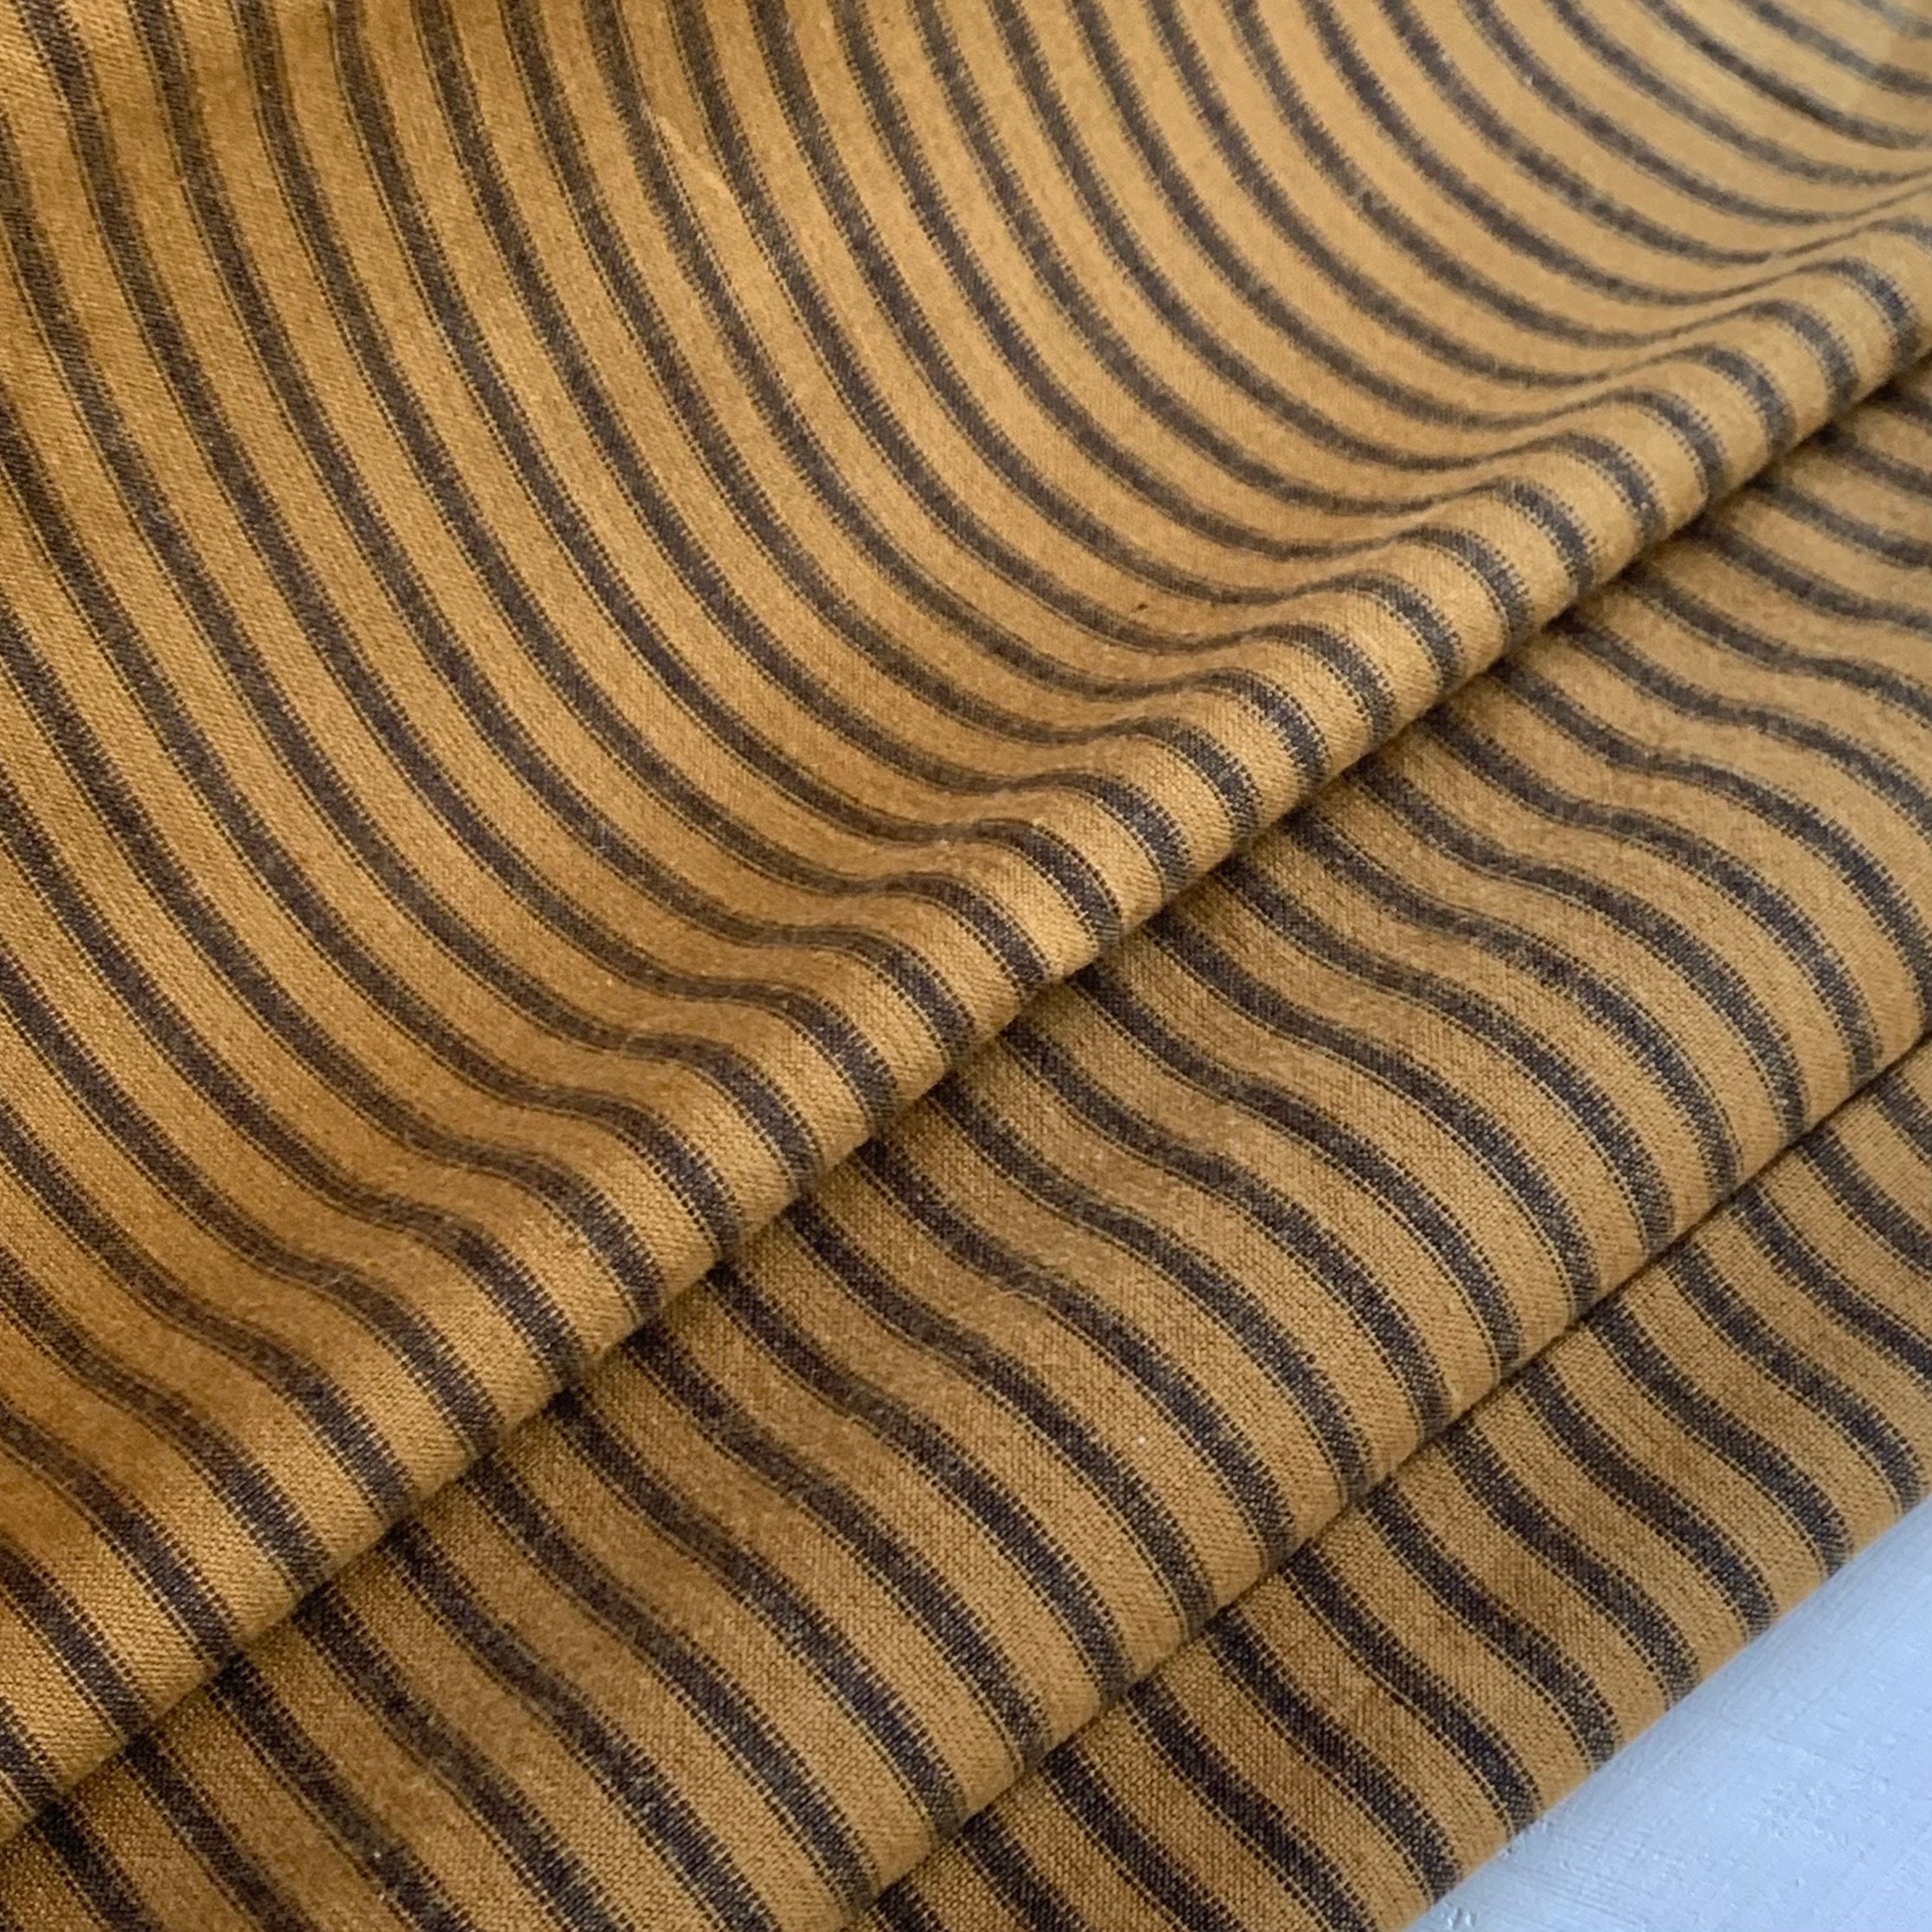 Homespun Striped Mustard and Black Fabric Woven Doubled Sided image